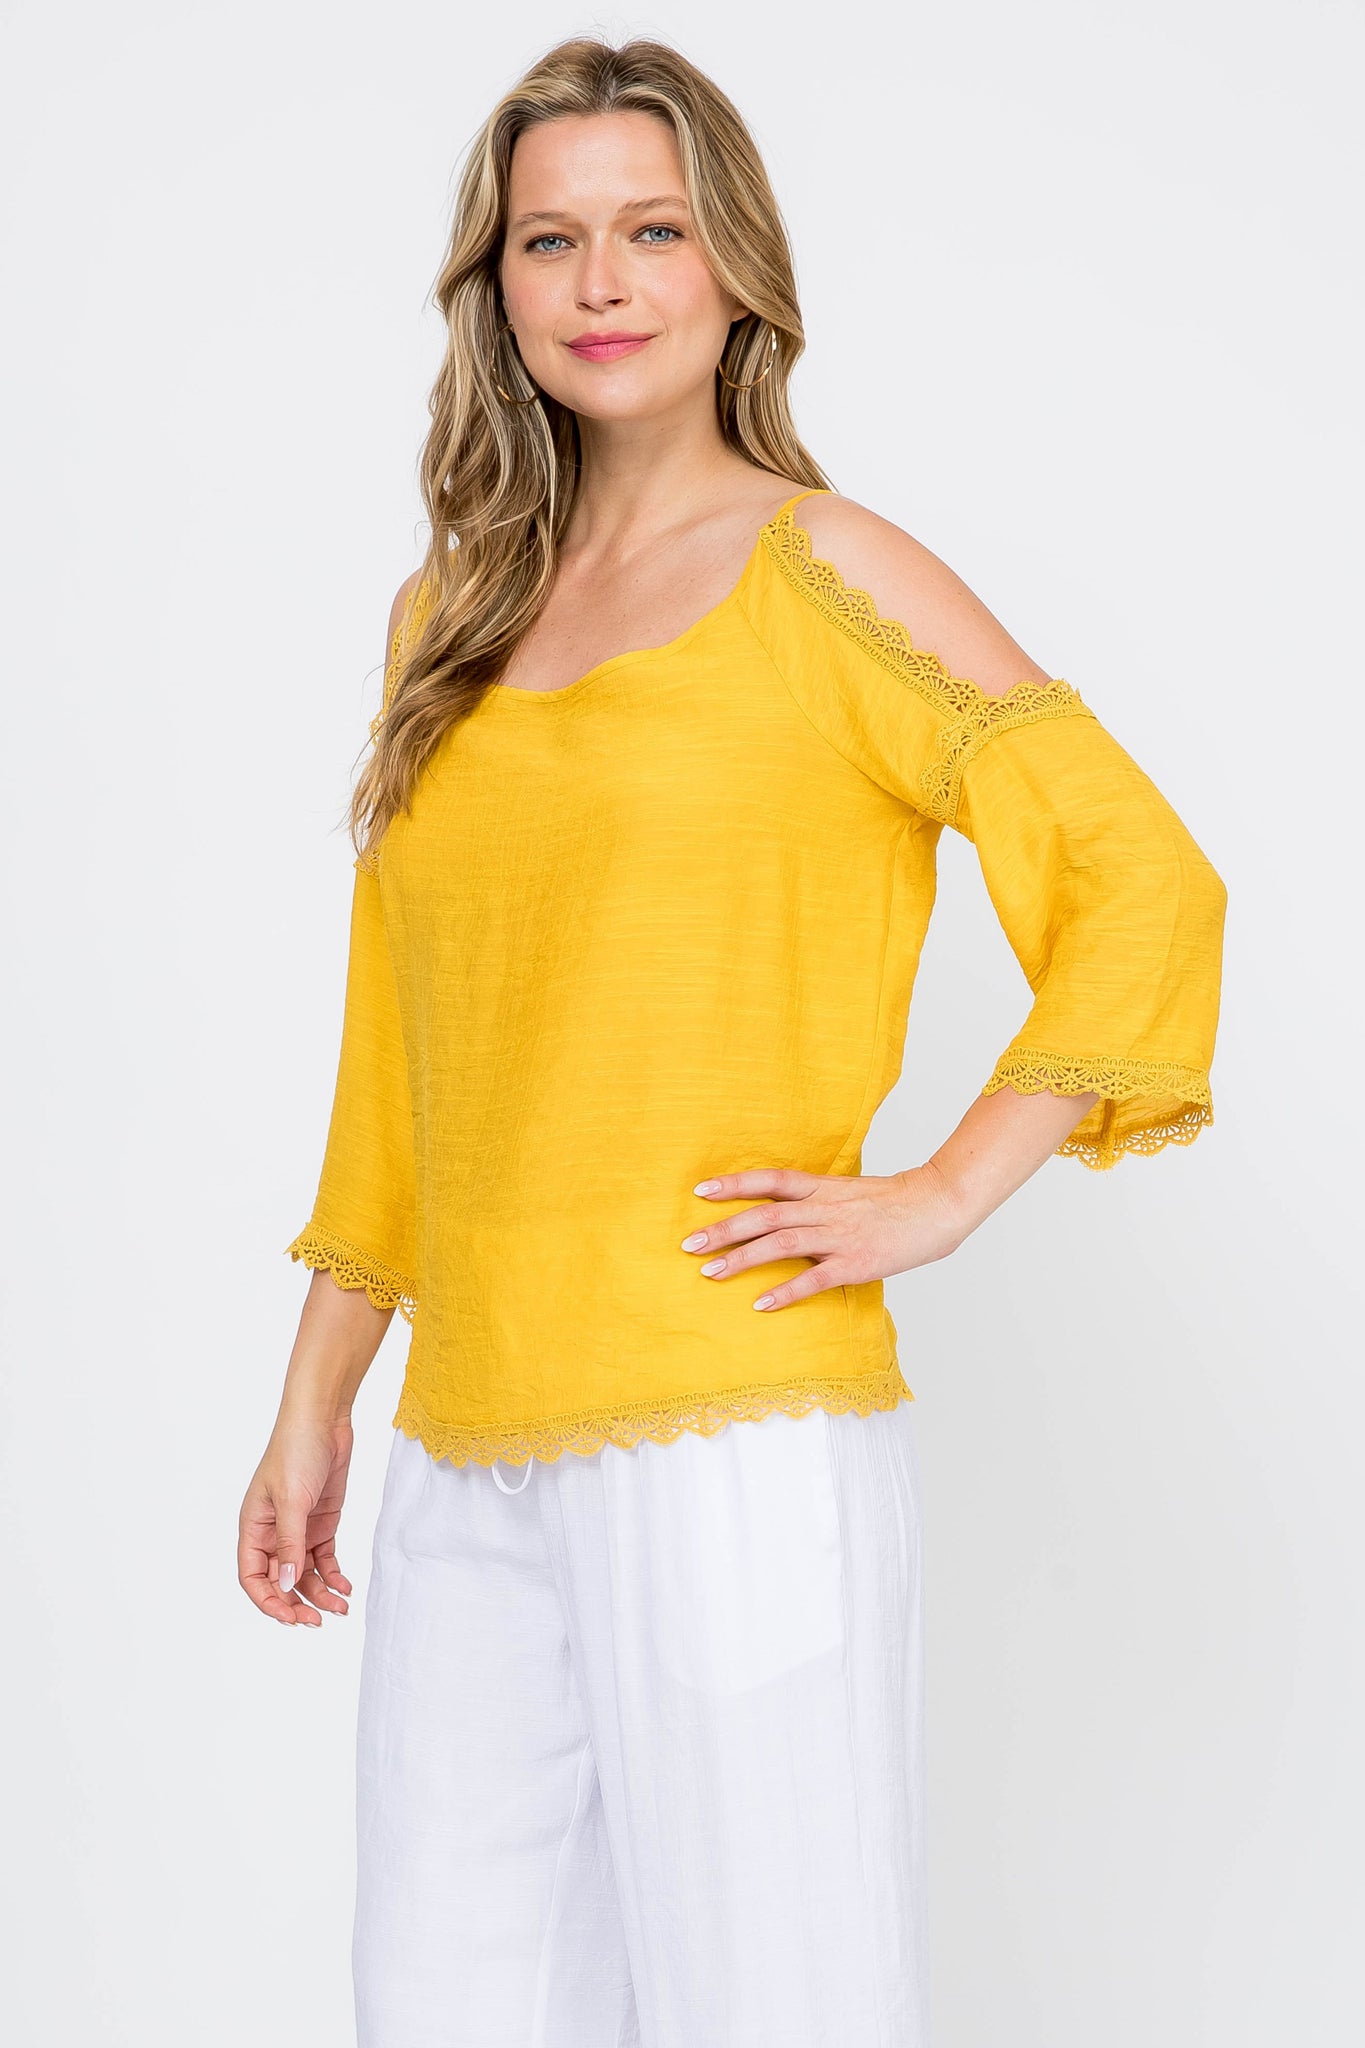 Women's Casual Cold Shoulder Scoop Neck Crochet Trimmed Hem and 3/4 Sleeve Tunic Top - Mojito Collection - Vacation Clothing, Women's Clothing, Women's Resort Wear, Women's Top